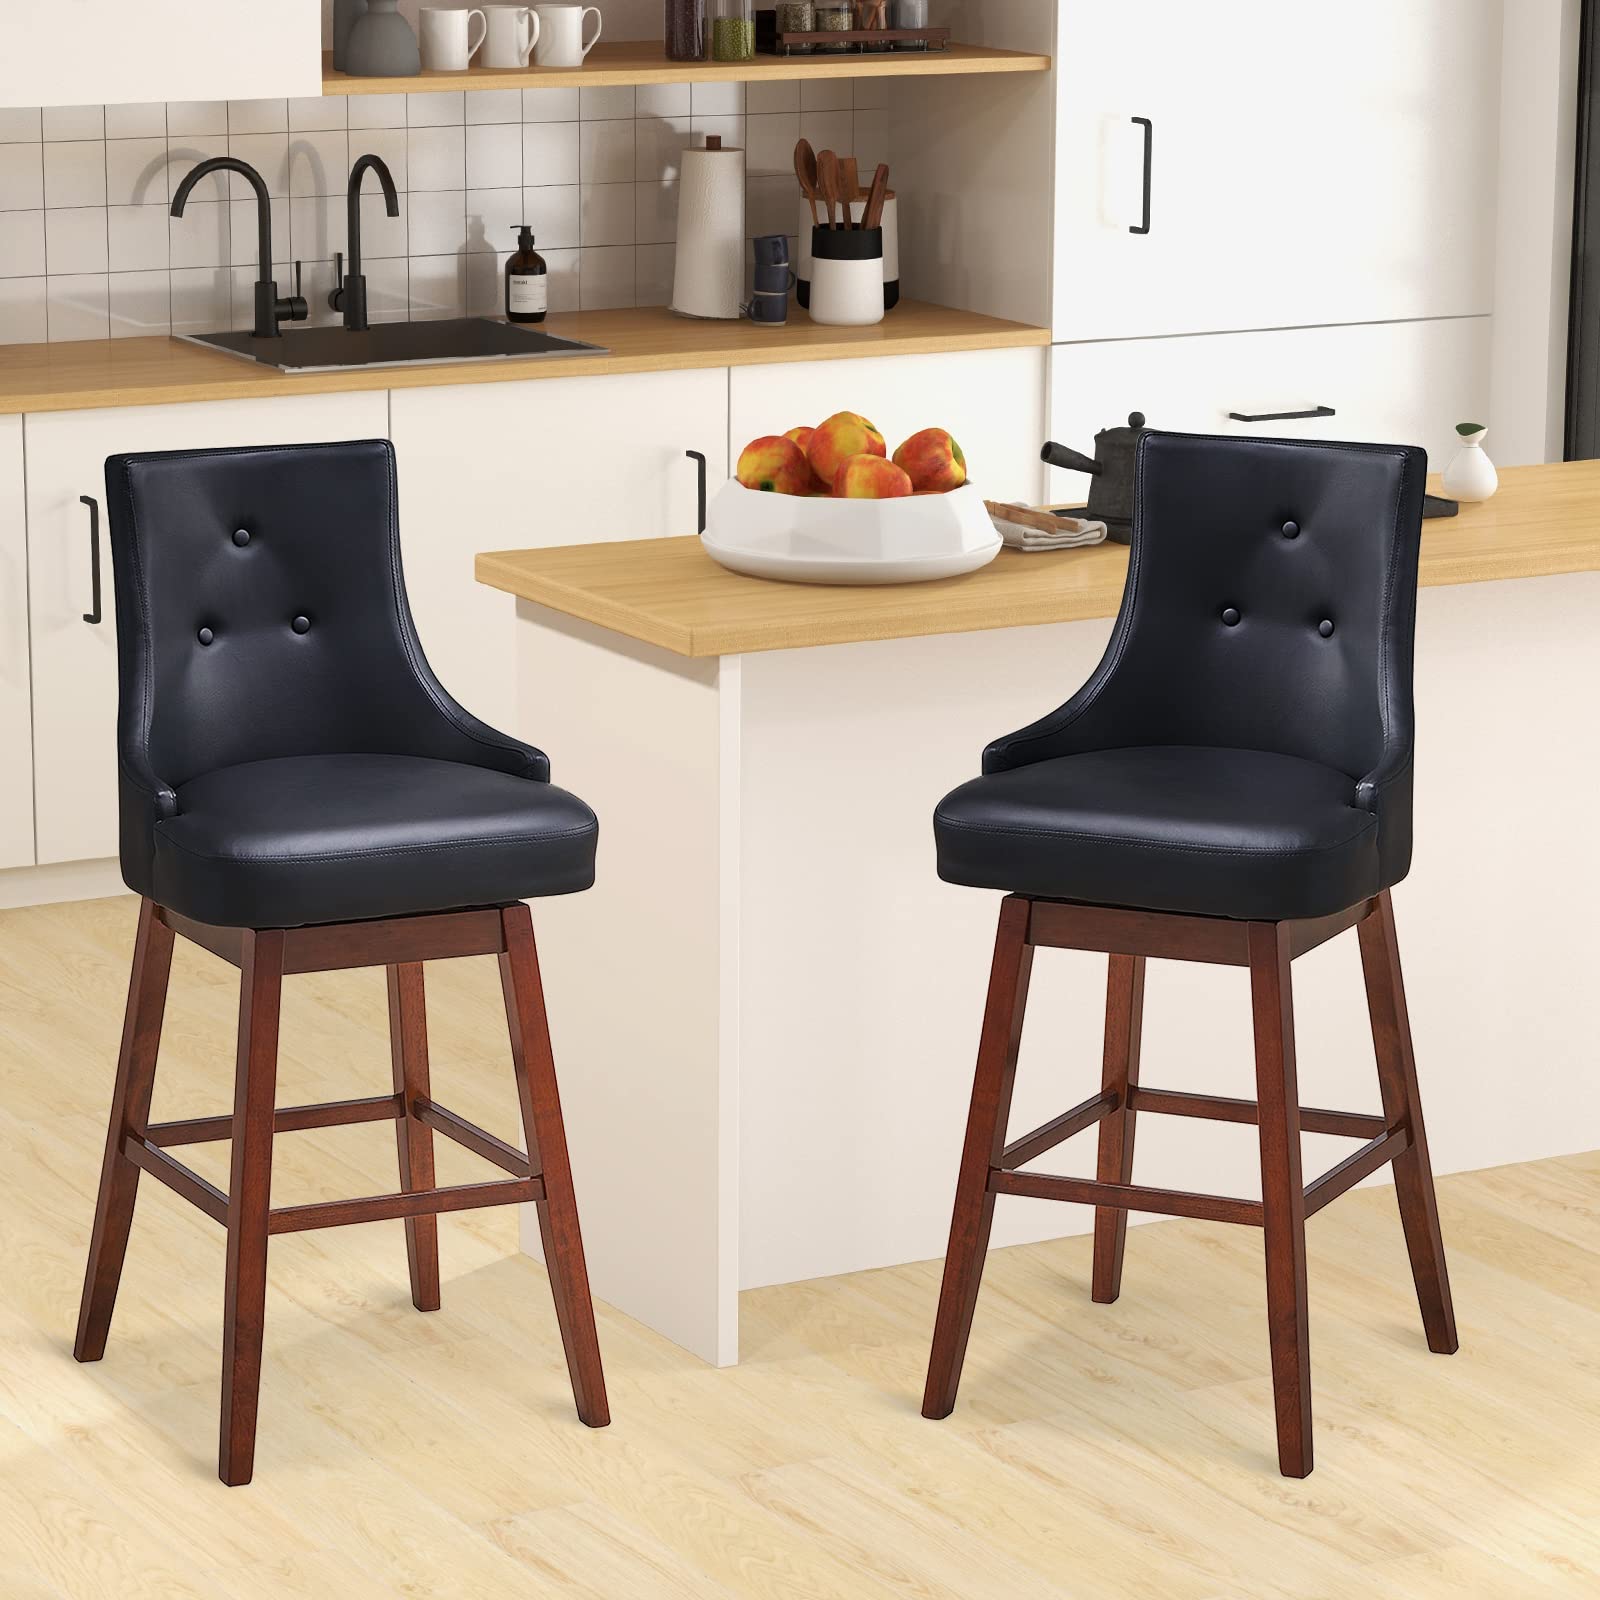 Giantex Swivel Bar Stools with Back Set of 2, 29" Counter Height Barstools with Foot Pads, Black